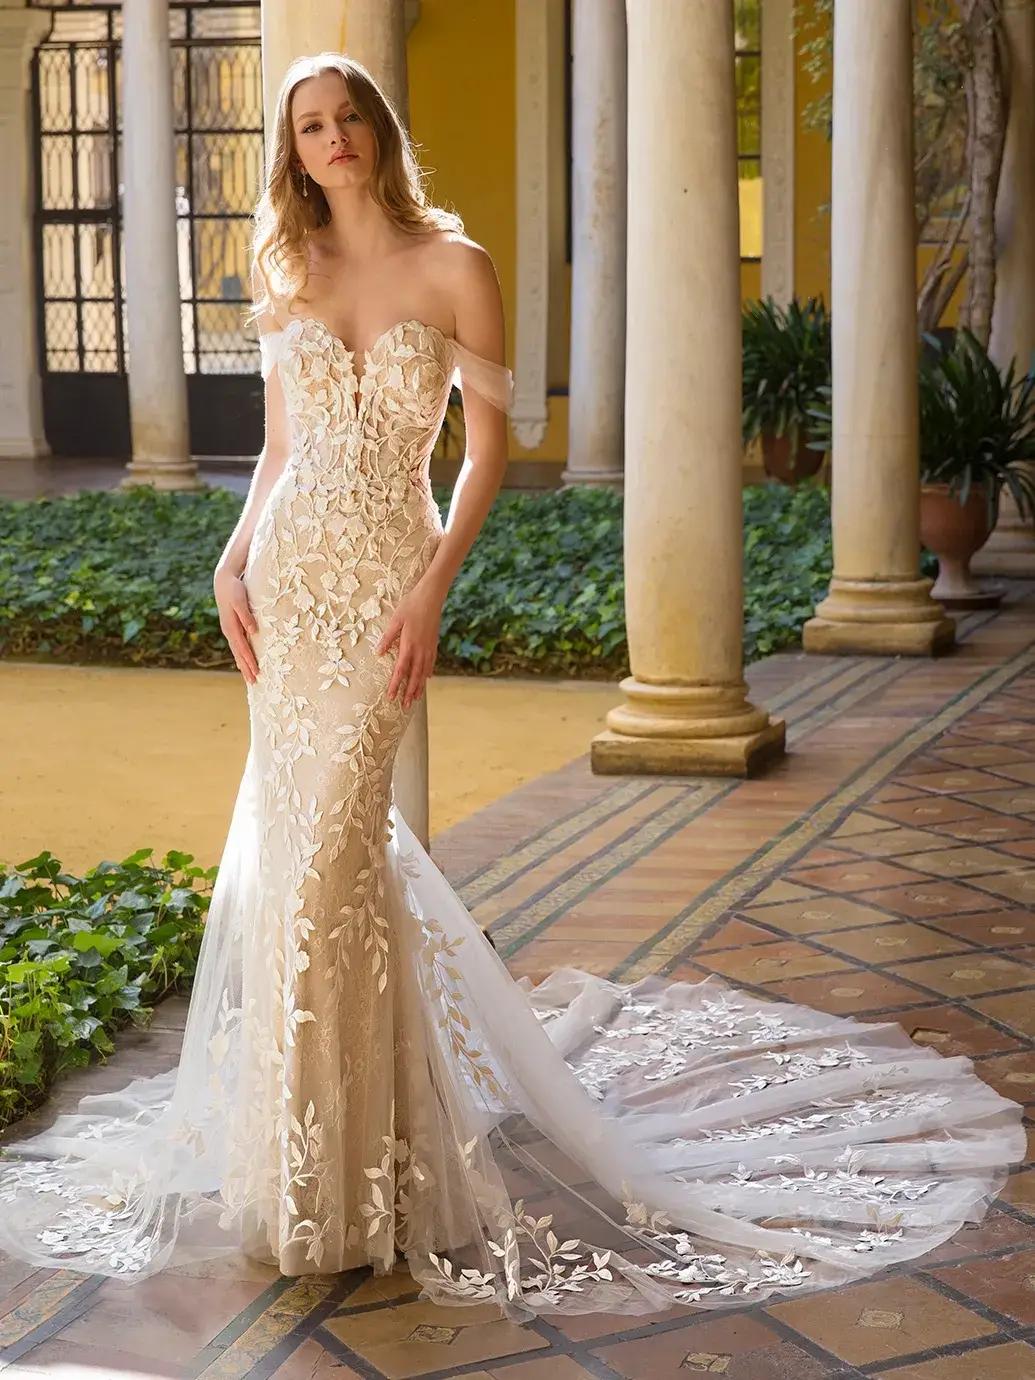 Elegance Unveiled: The Artistry of Pearl Beaded Lace Appliques on Chantilly Lace Wedding Dresses Image